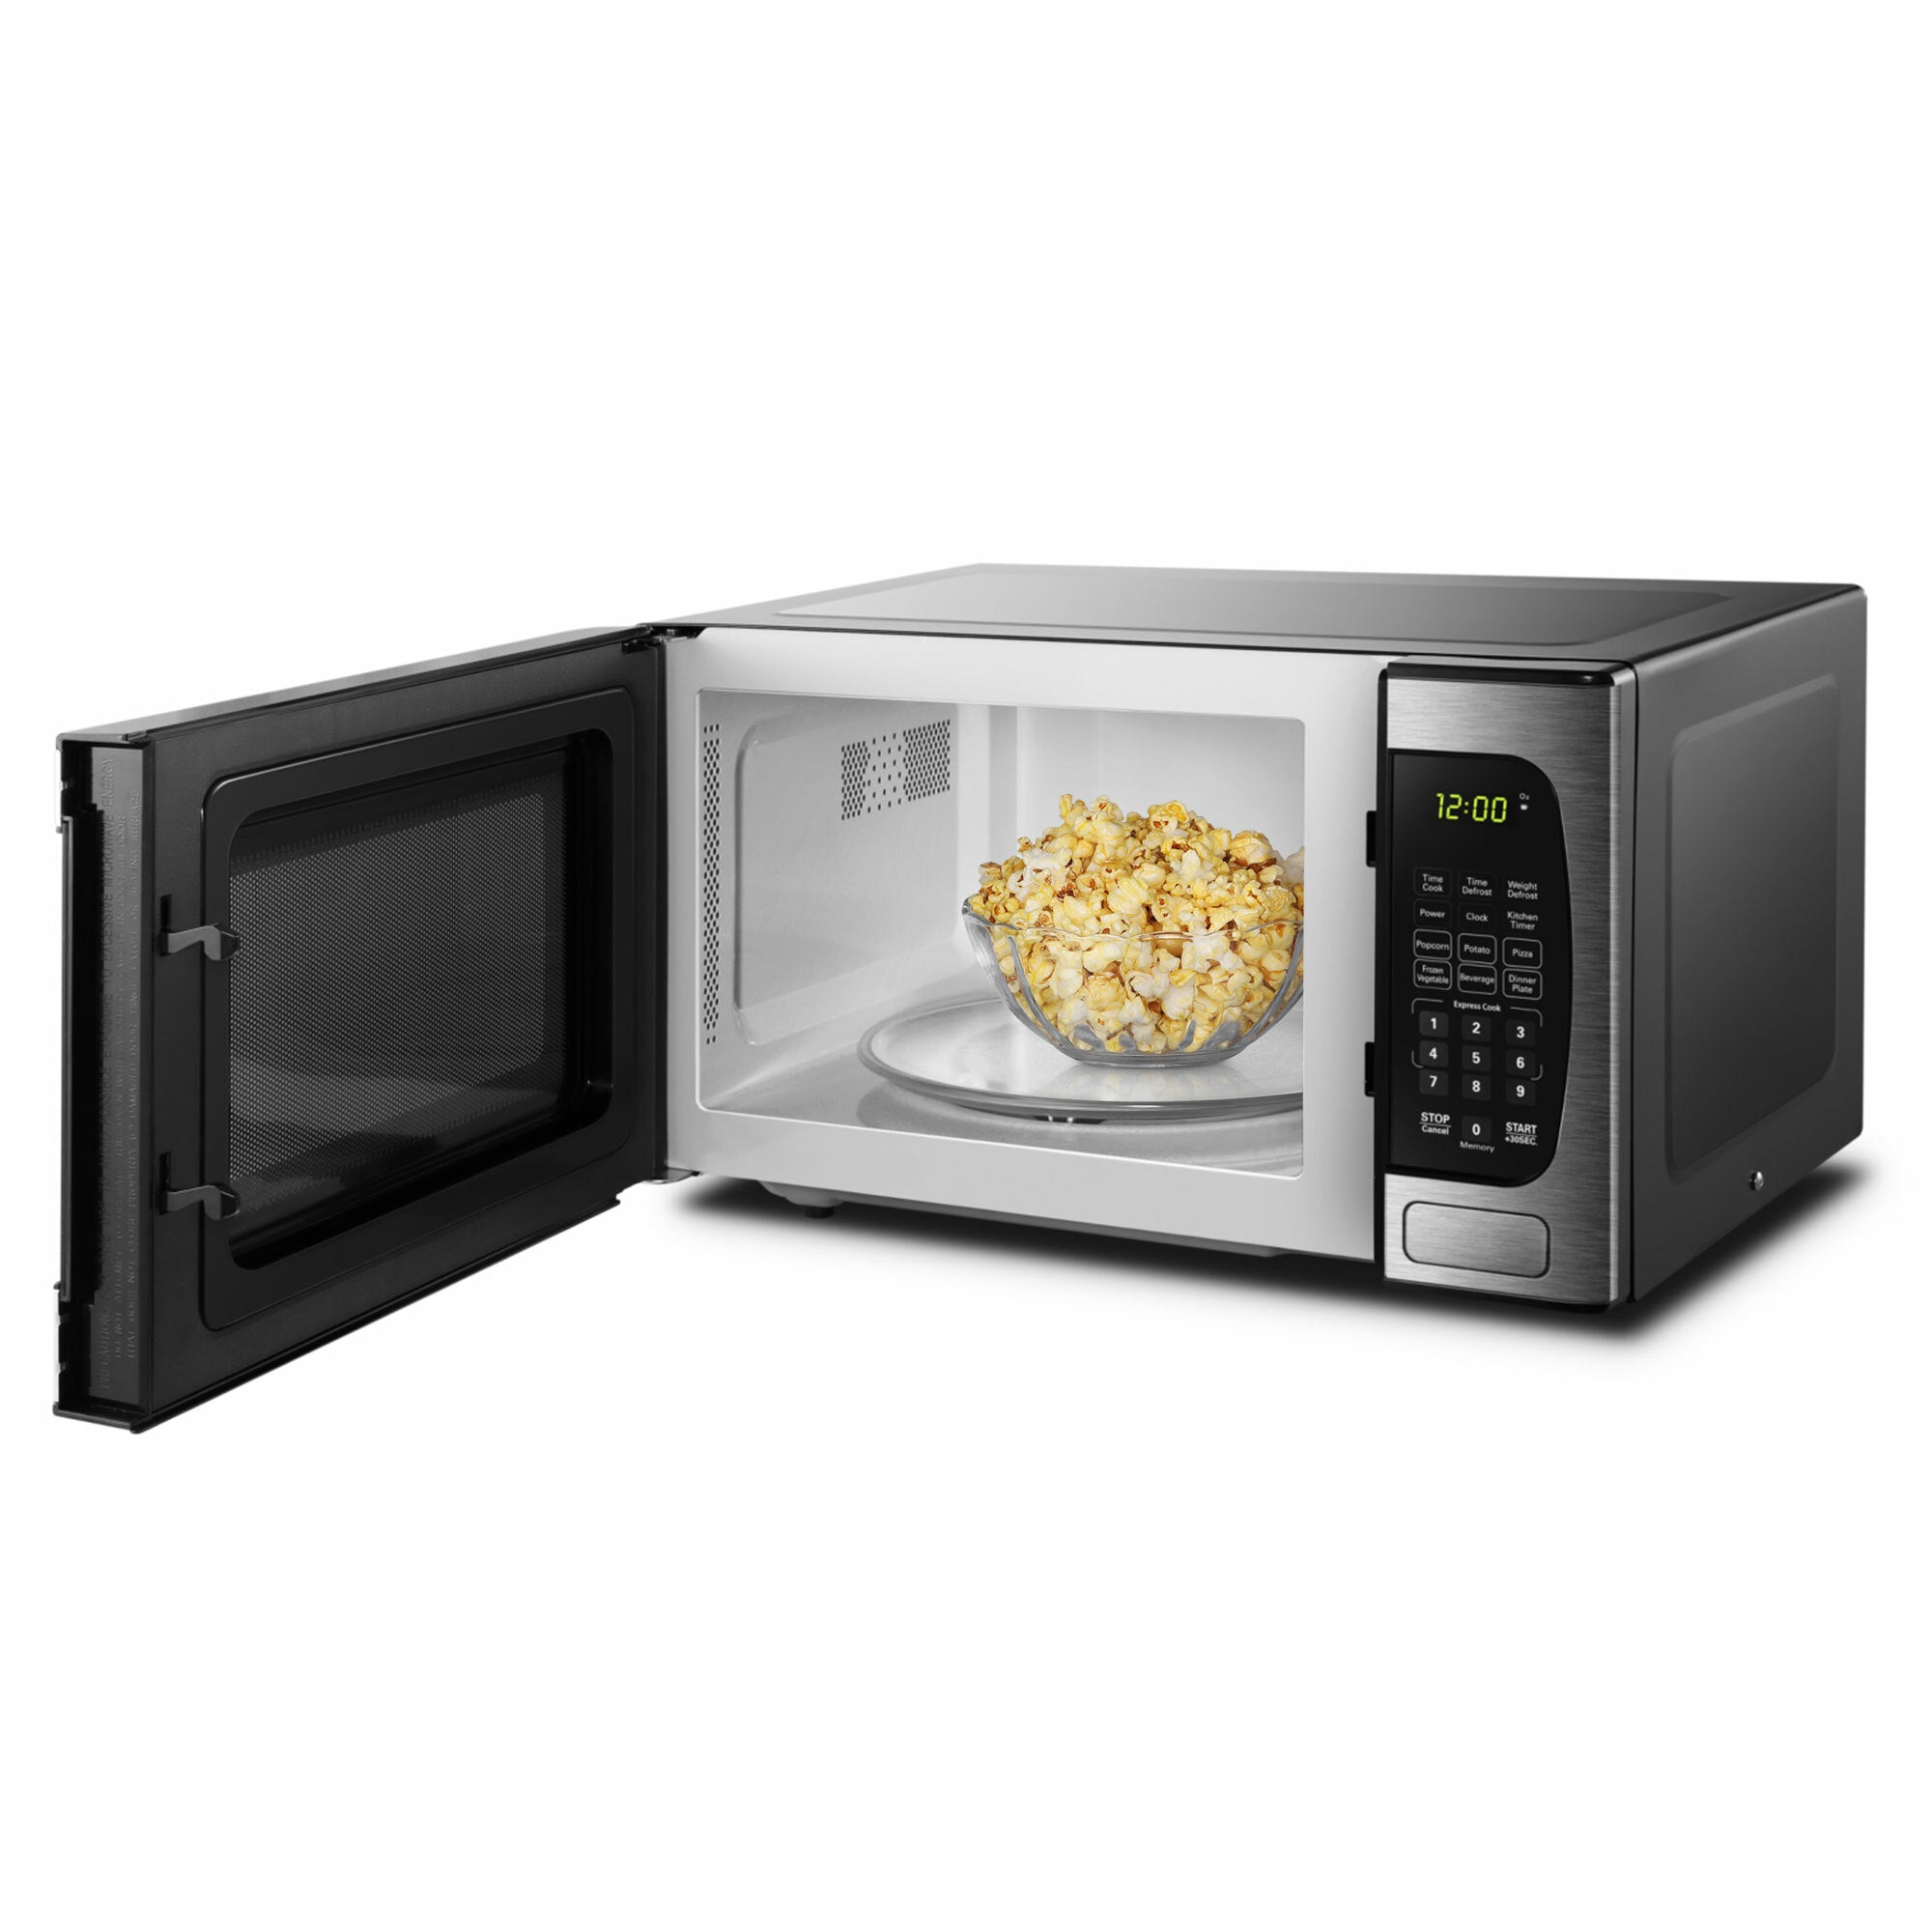 Danby - 0.9 cu. Ft  Counter top Microwave in Stainless - DBMW0924BBS